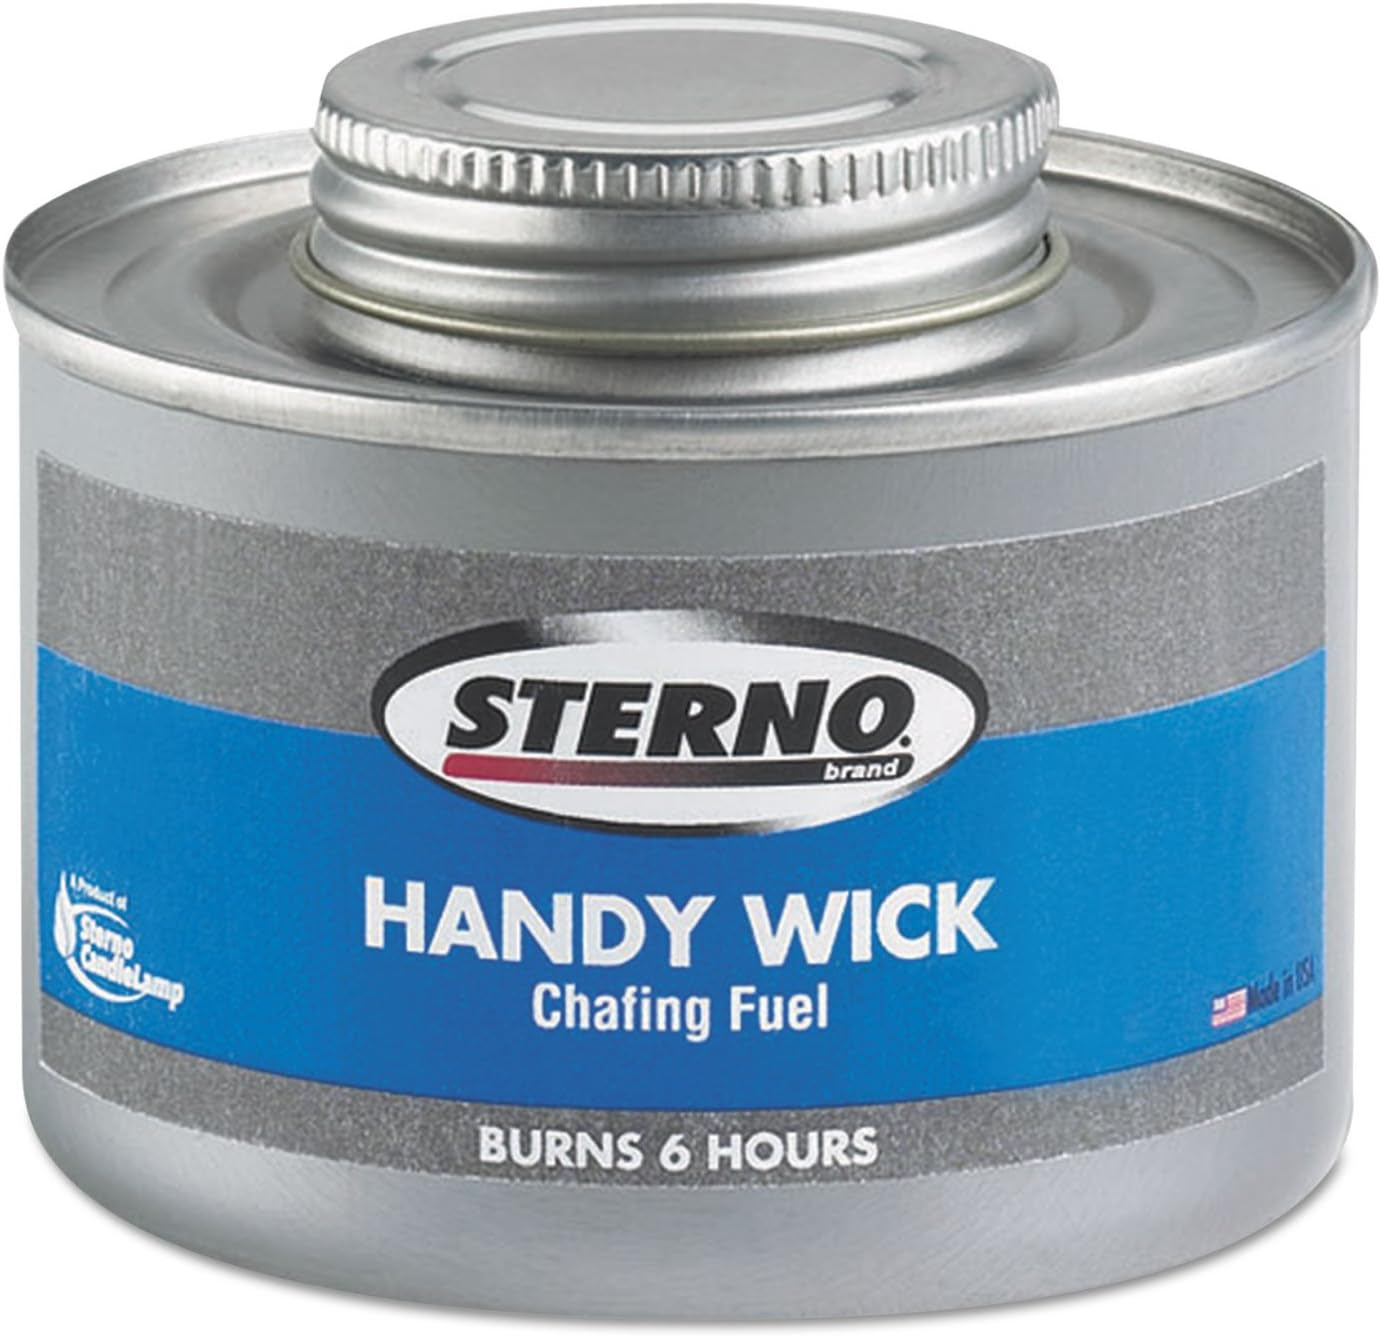 Sterno 24 Pack Handy Wick Chafing Fuel.  120 Cases. EXW Los Angeles $59.00 Case.